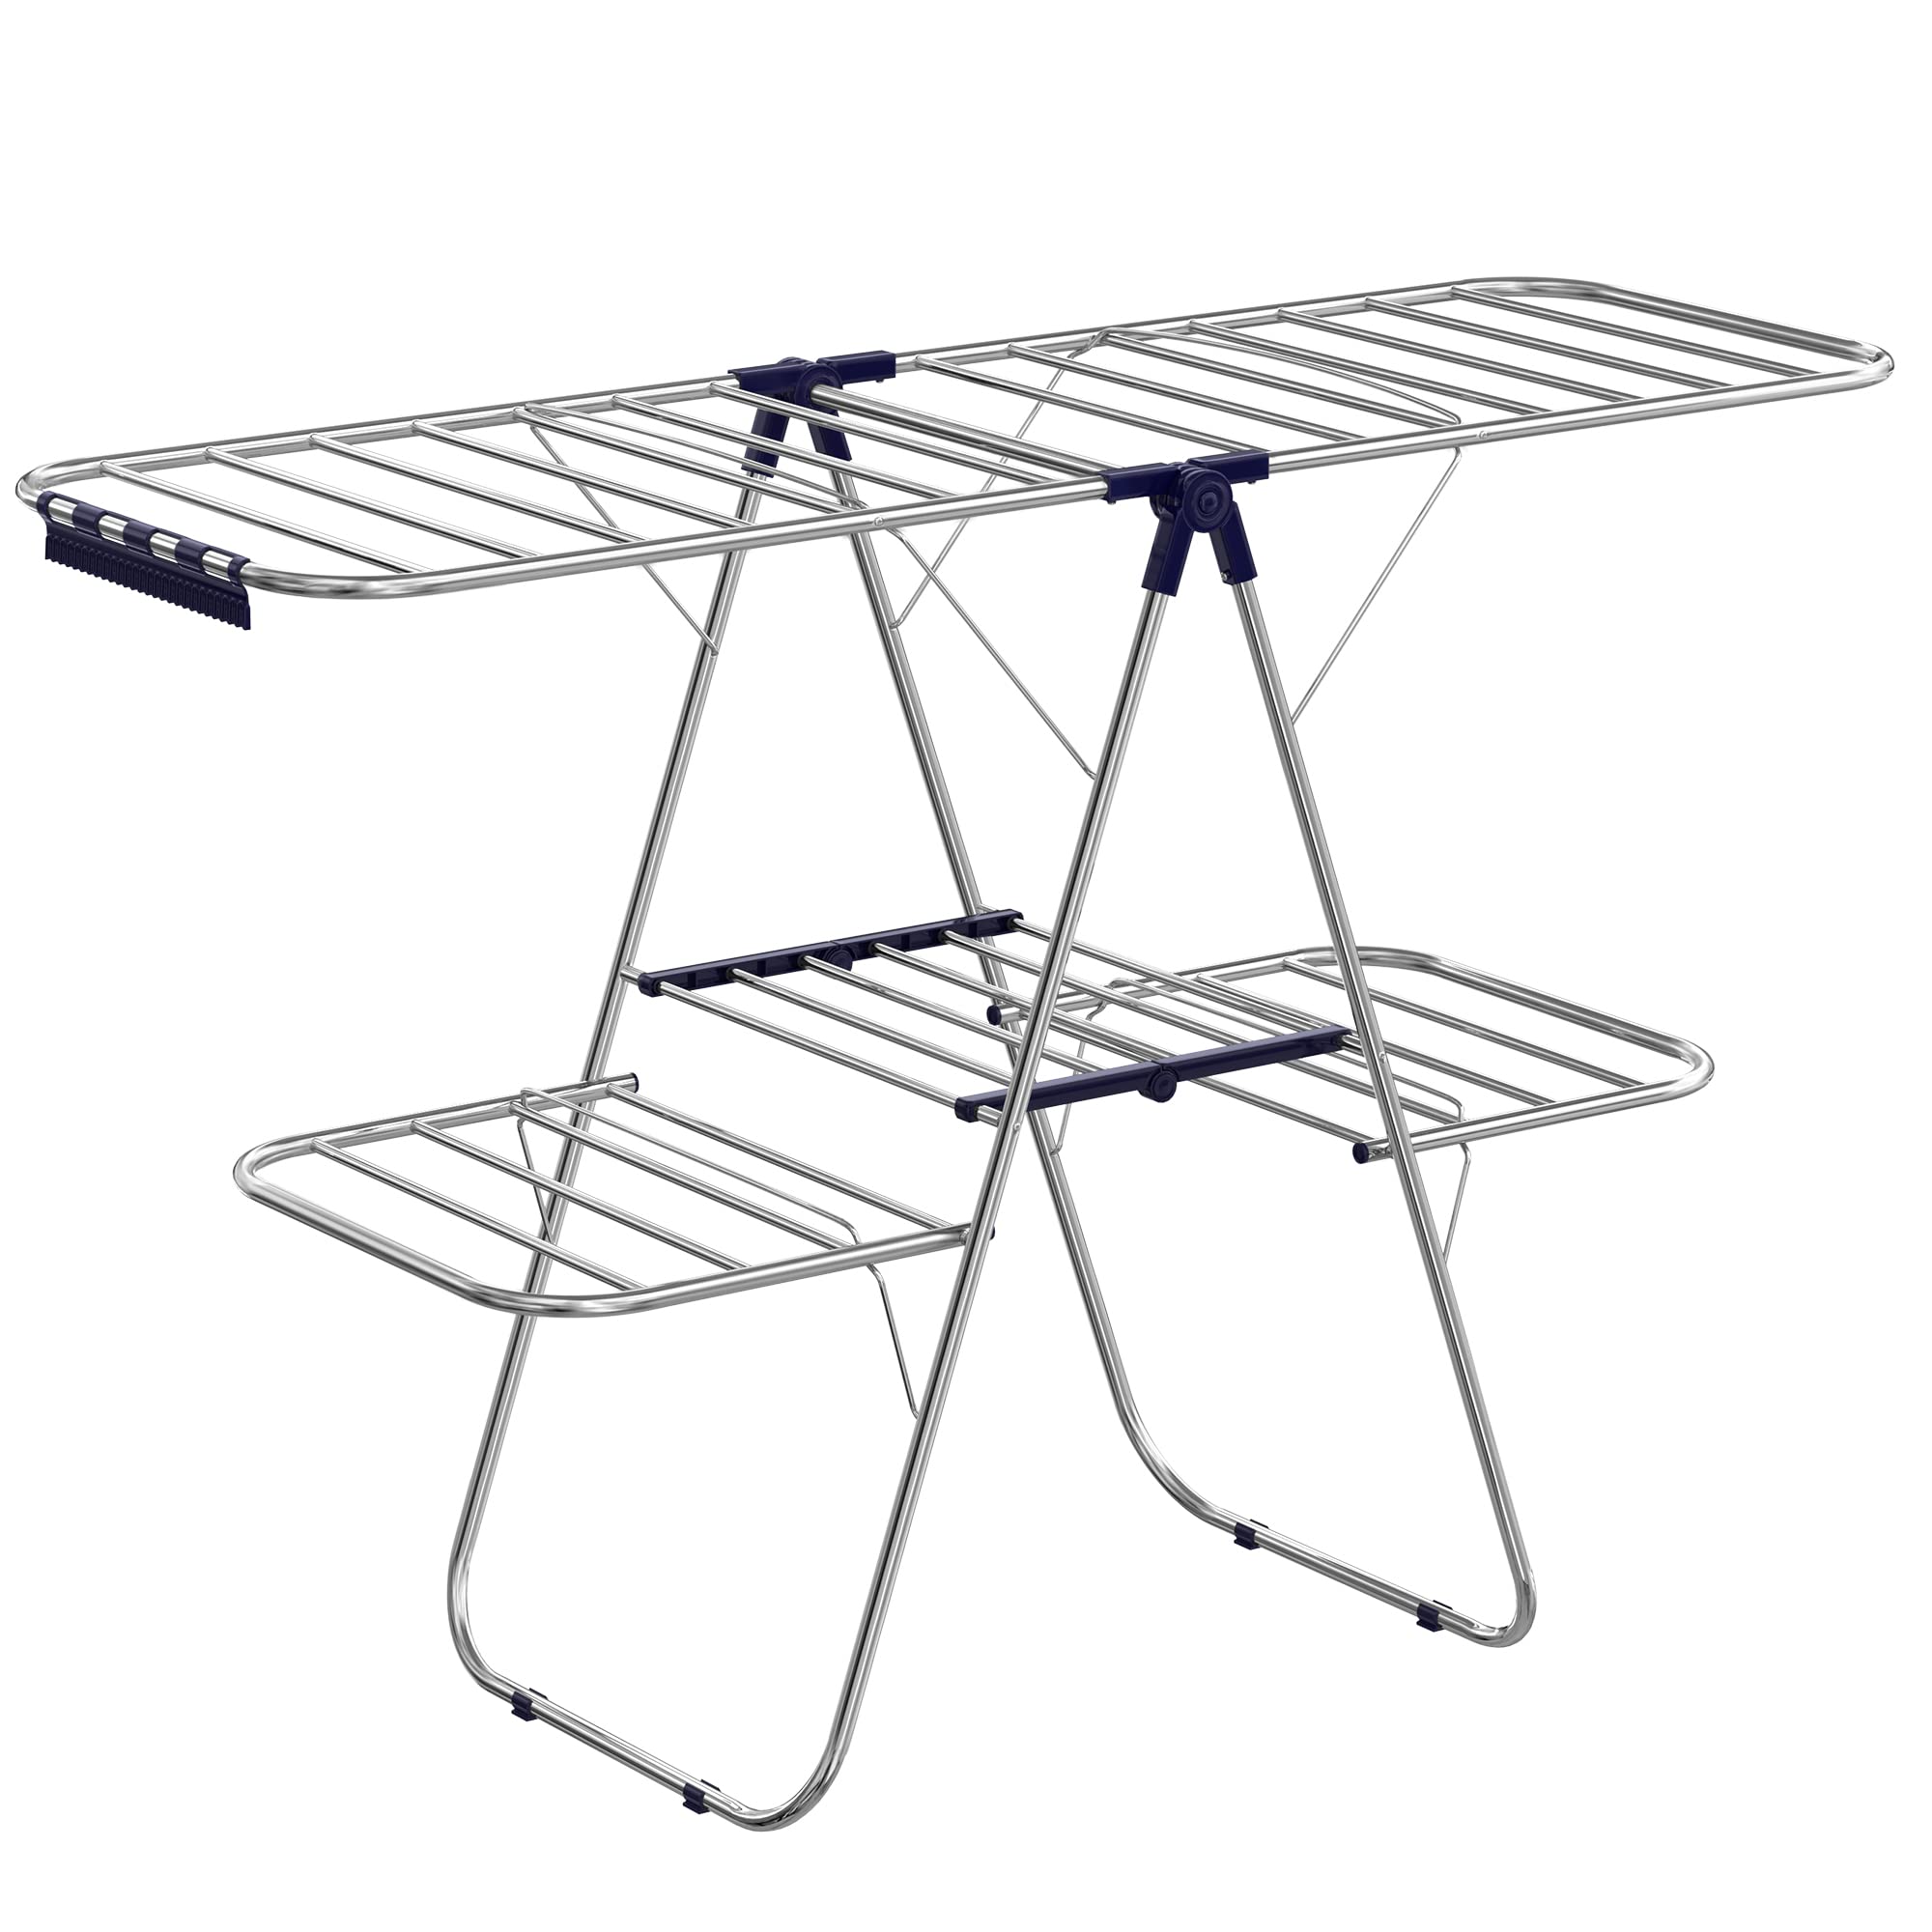 Songmics Clothes Drying Rack, Foldable 2-Level Stable Indoor Airer, Free-Standing Laundry Stand, with Height-Adjustable Gullwings, for Bed Linen, Clothing, Socks, Scarves